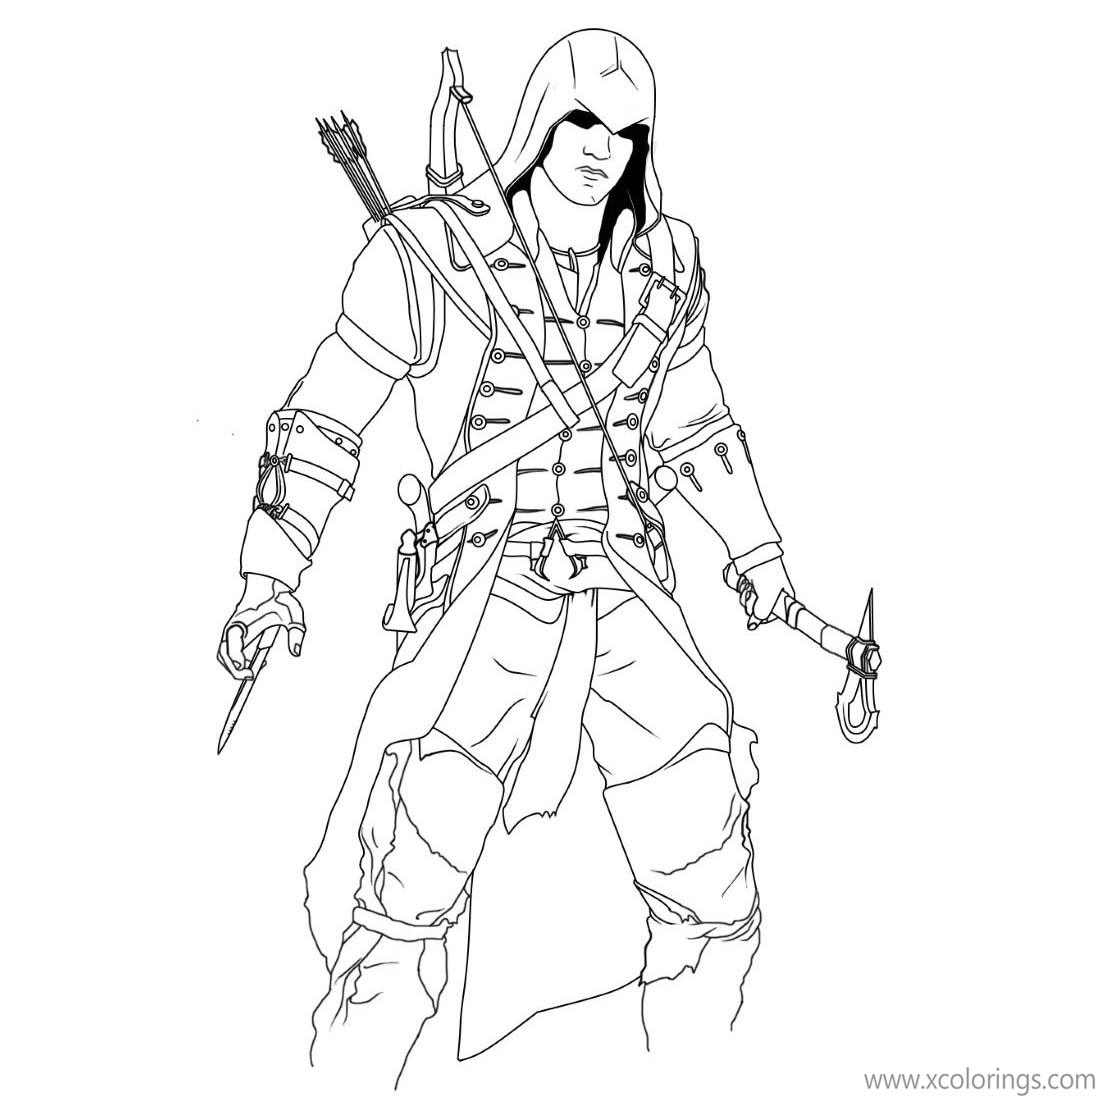 Free Assassin's Creed Coloring Pages Connor Kenway printable